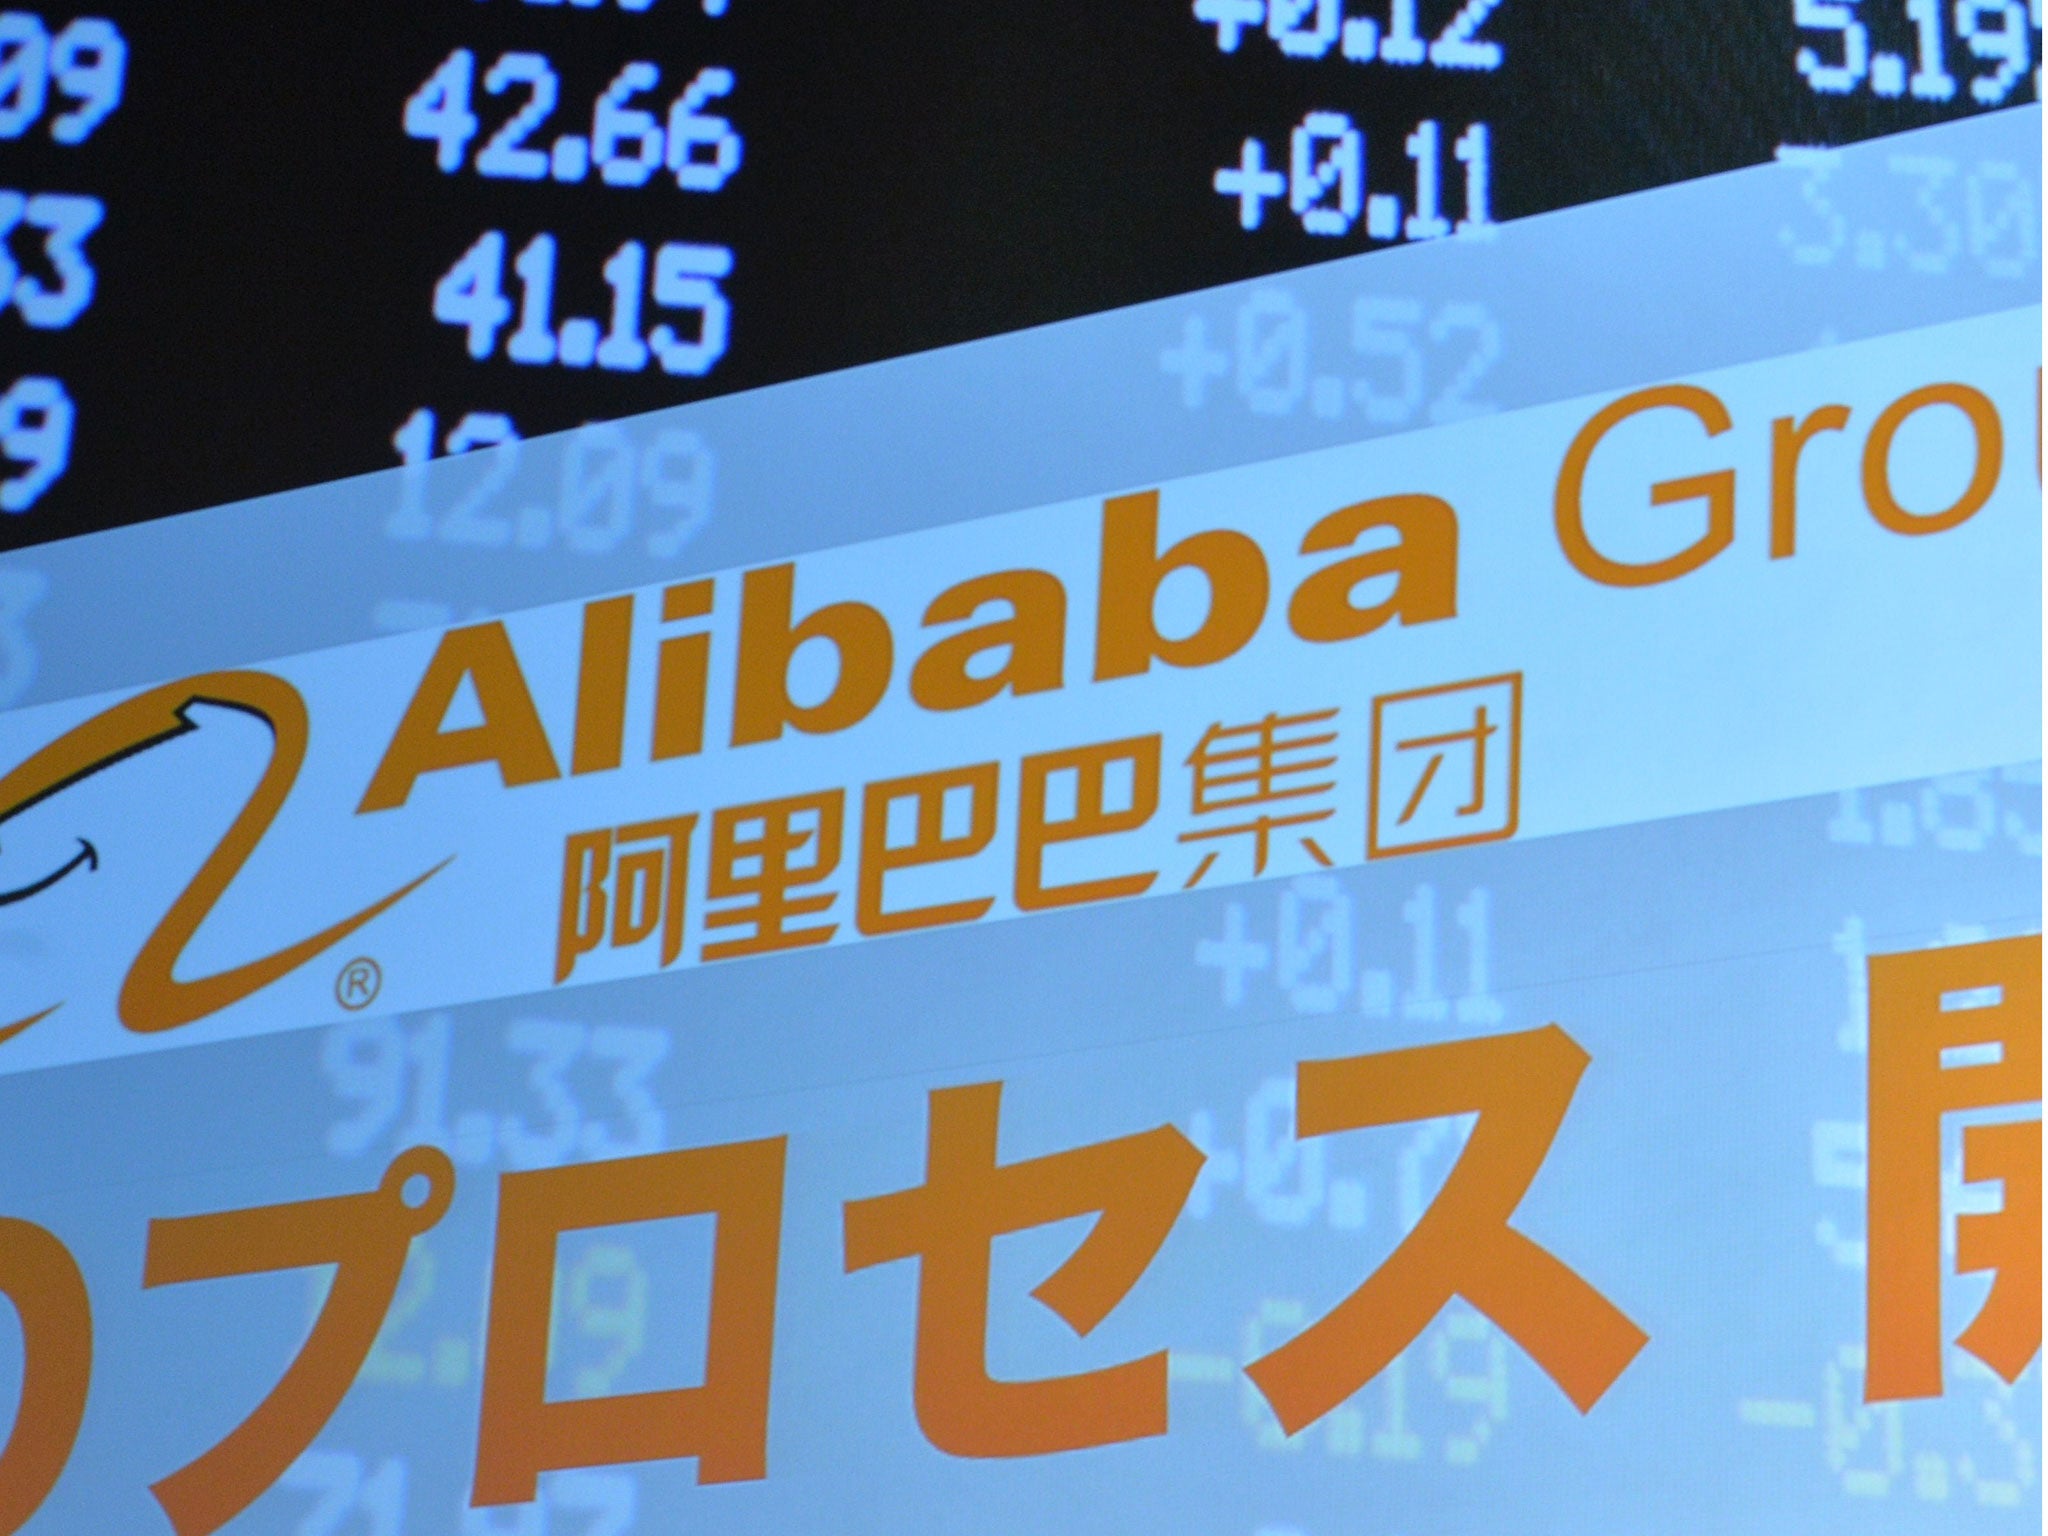 Just over two years ago Alibaba was under US scrutiny because so many counterfeiters were selling goods on its website. 